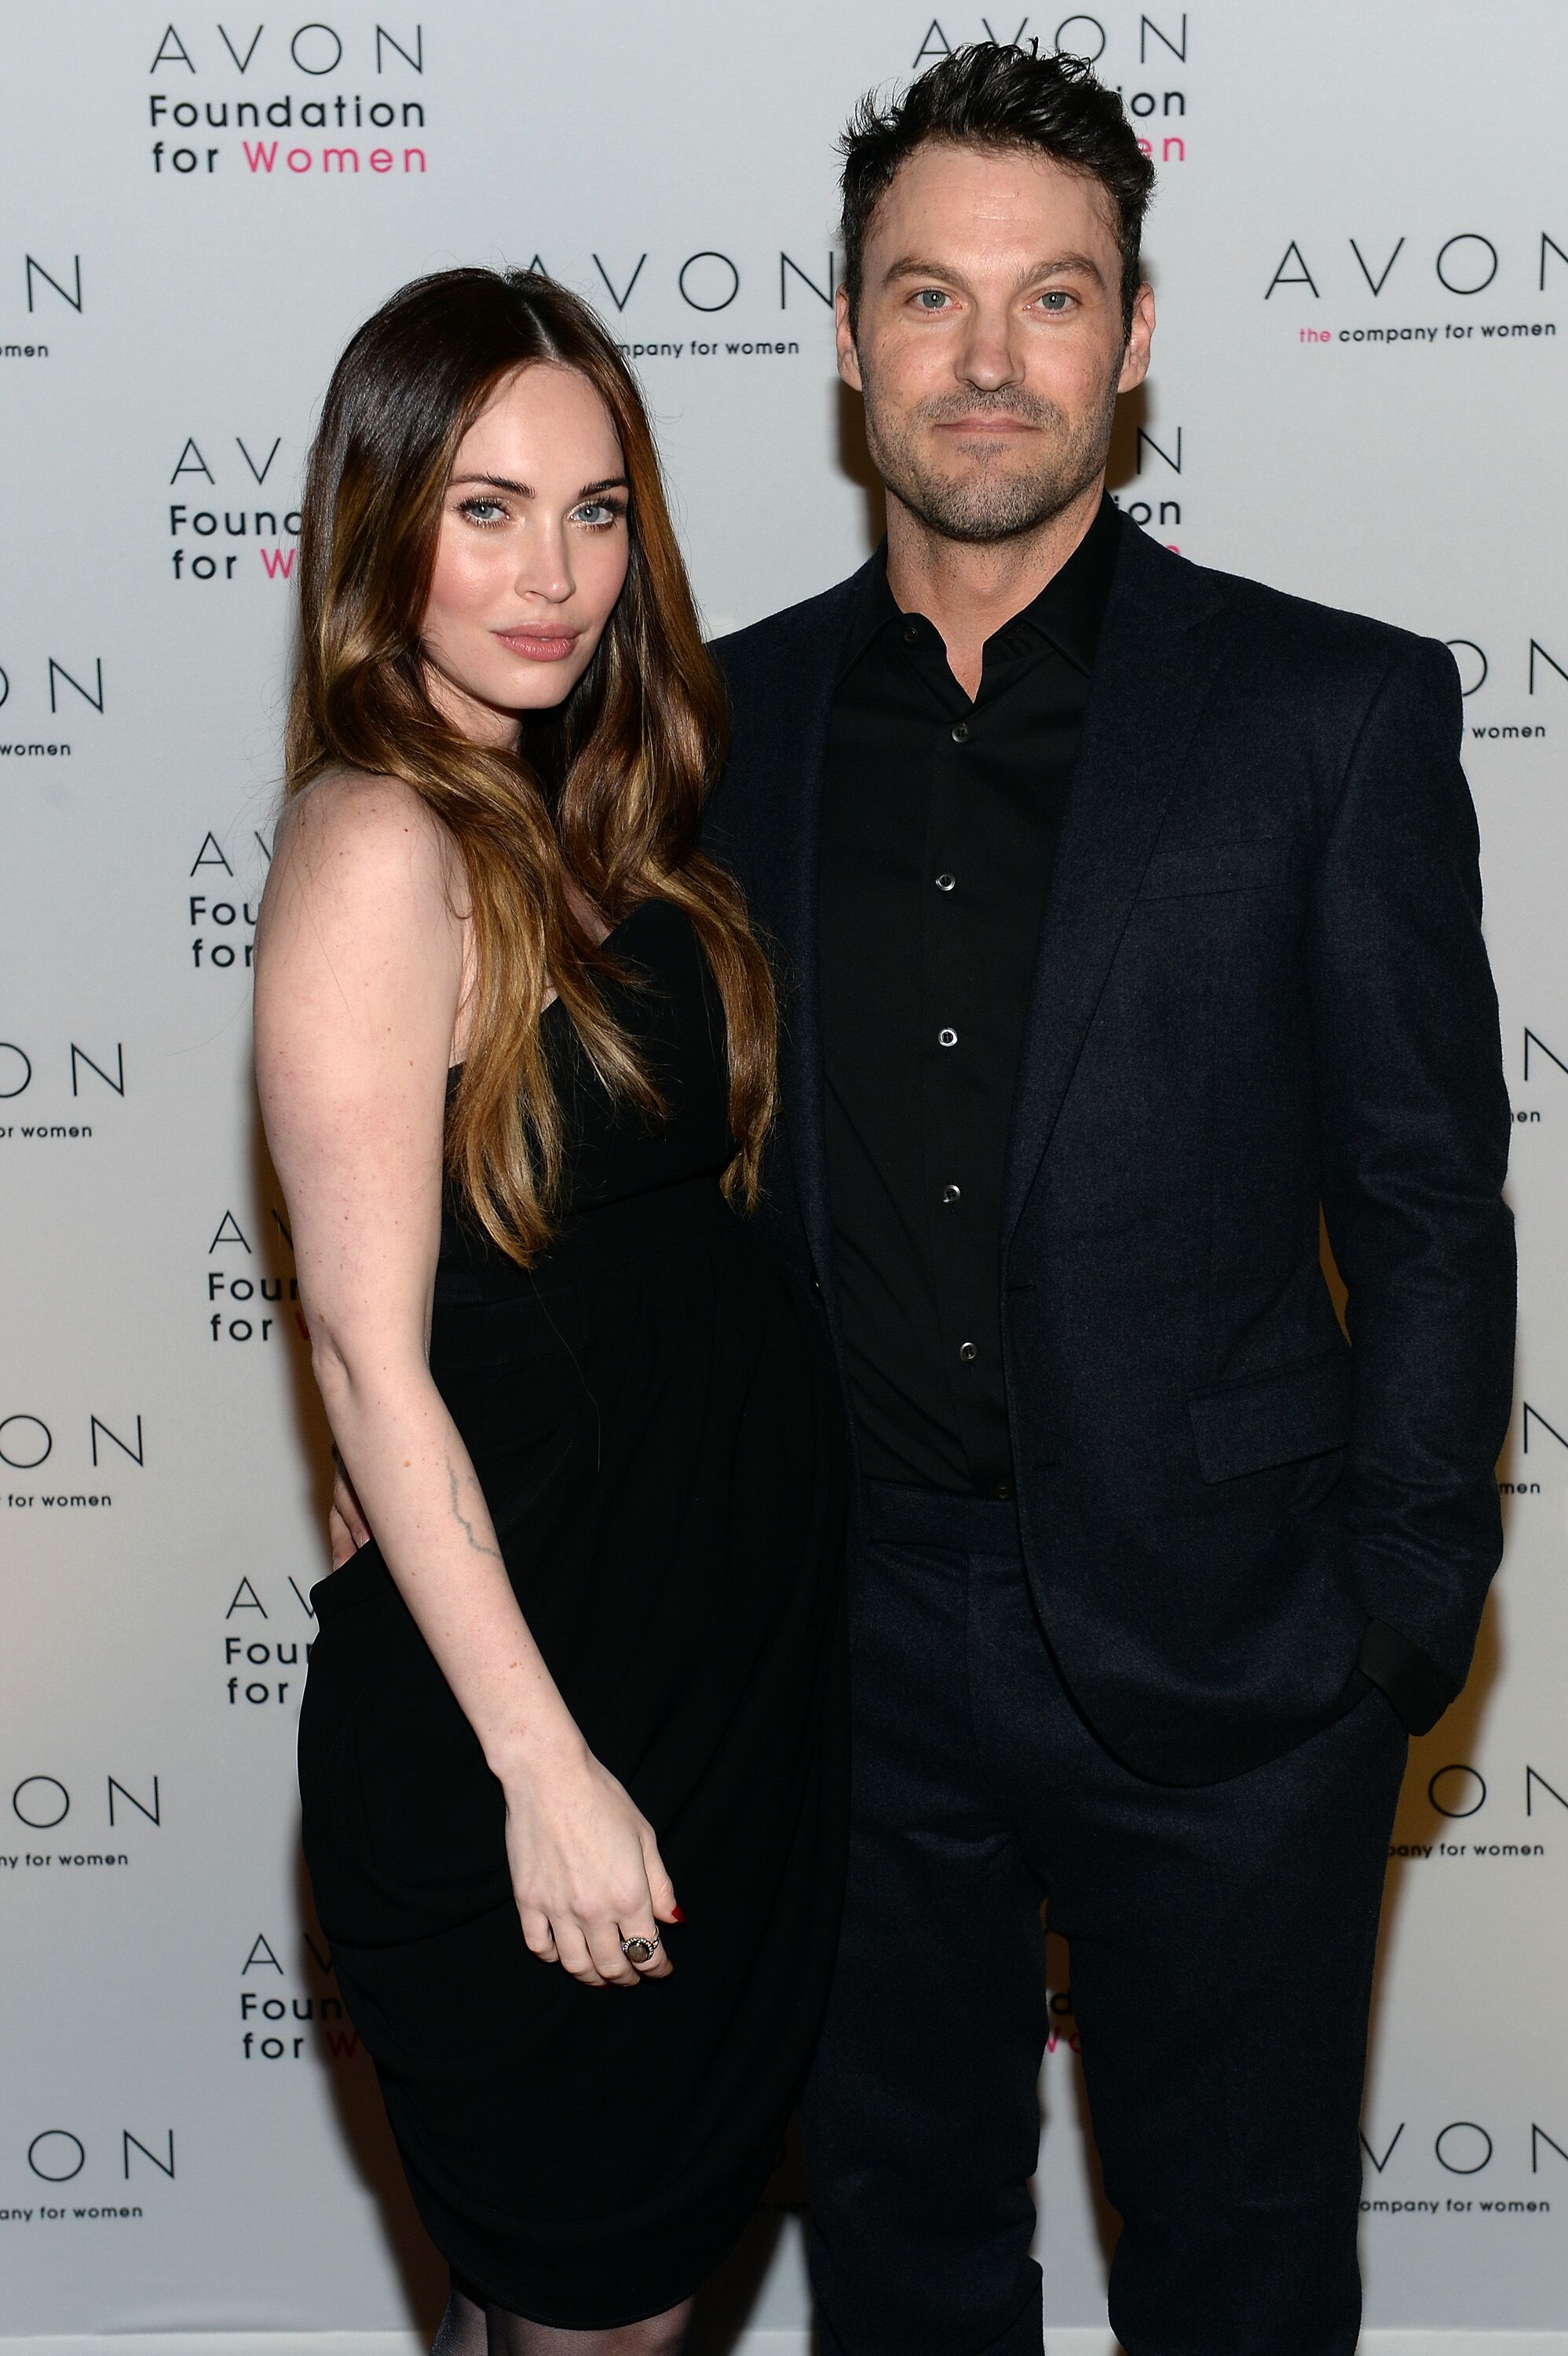 Megan Fox and Brian Austin Green at The Morgan Library & Museum. | Source: Getty Images